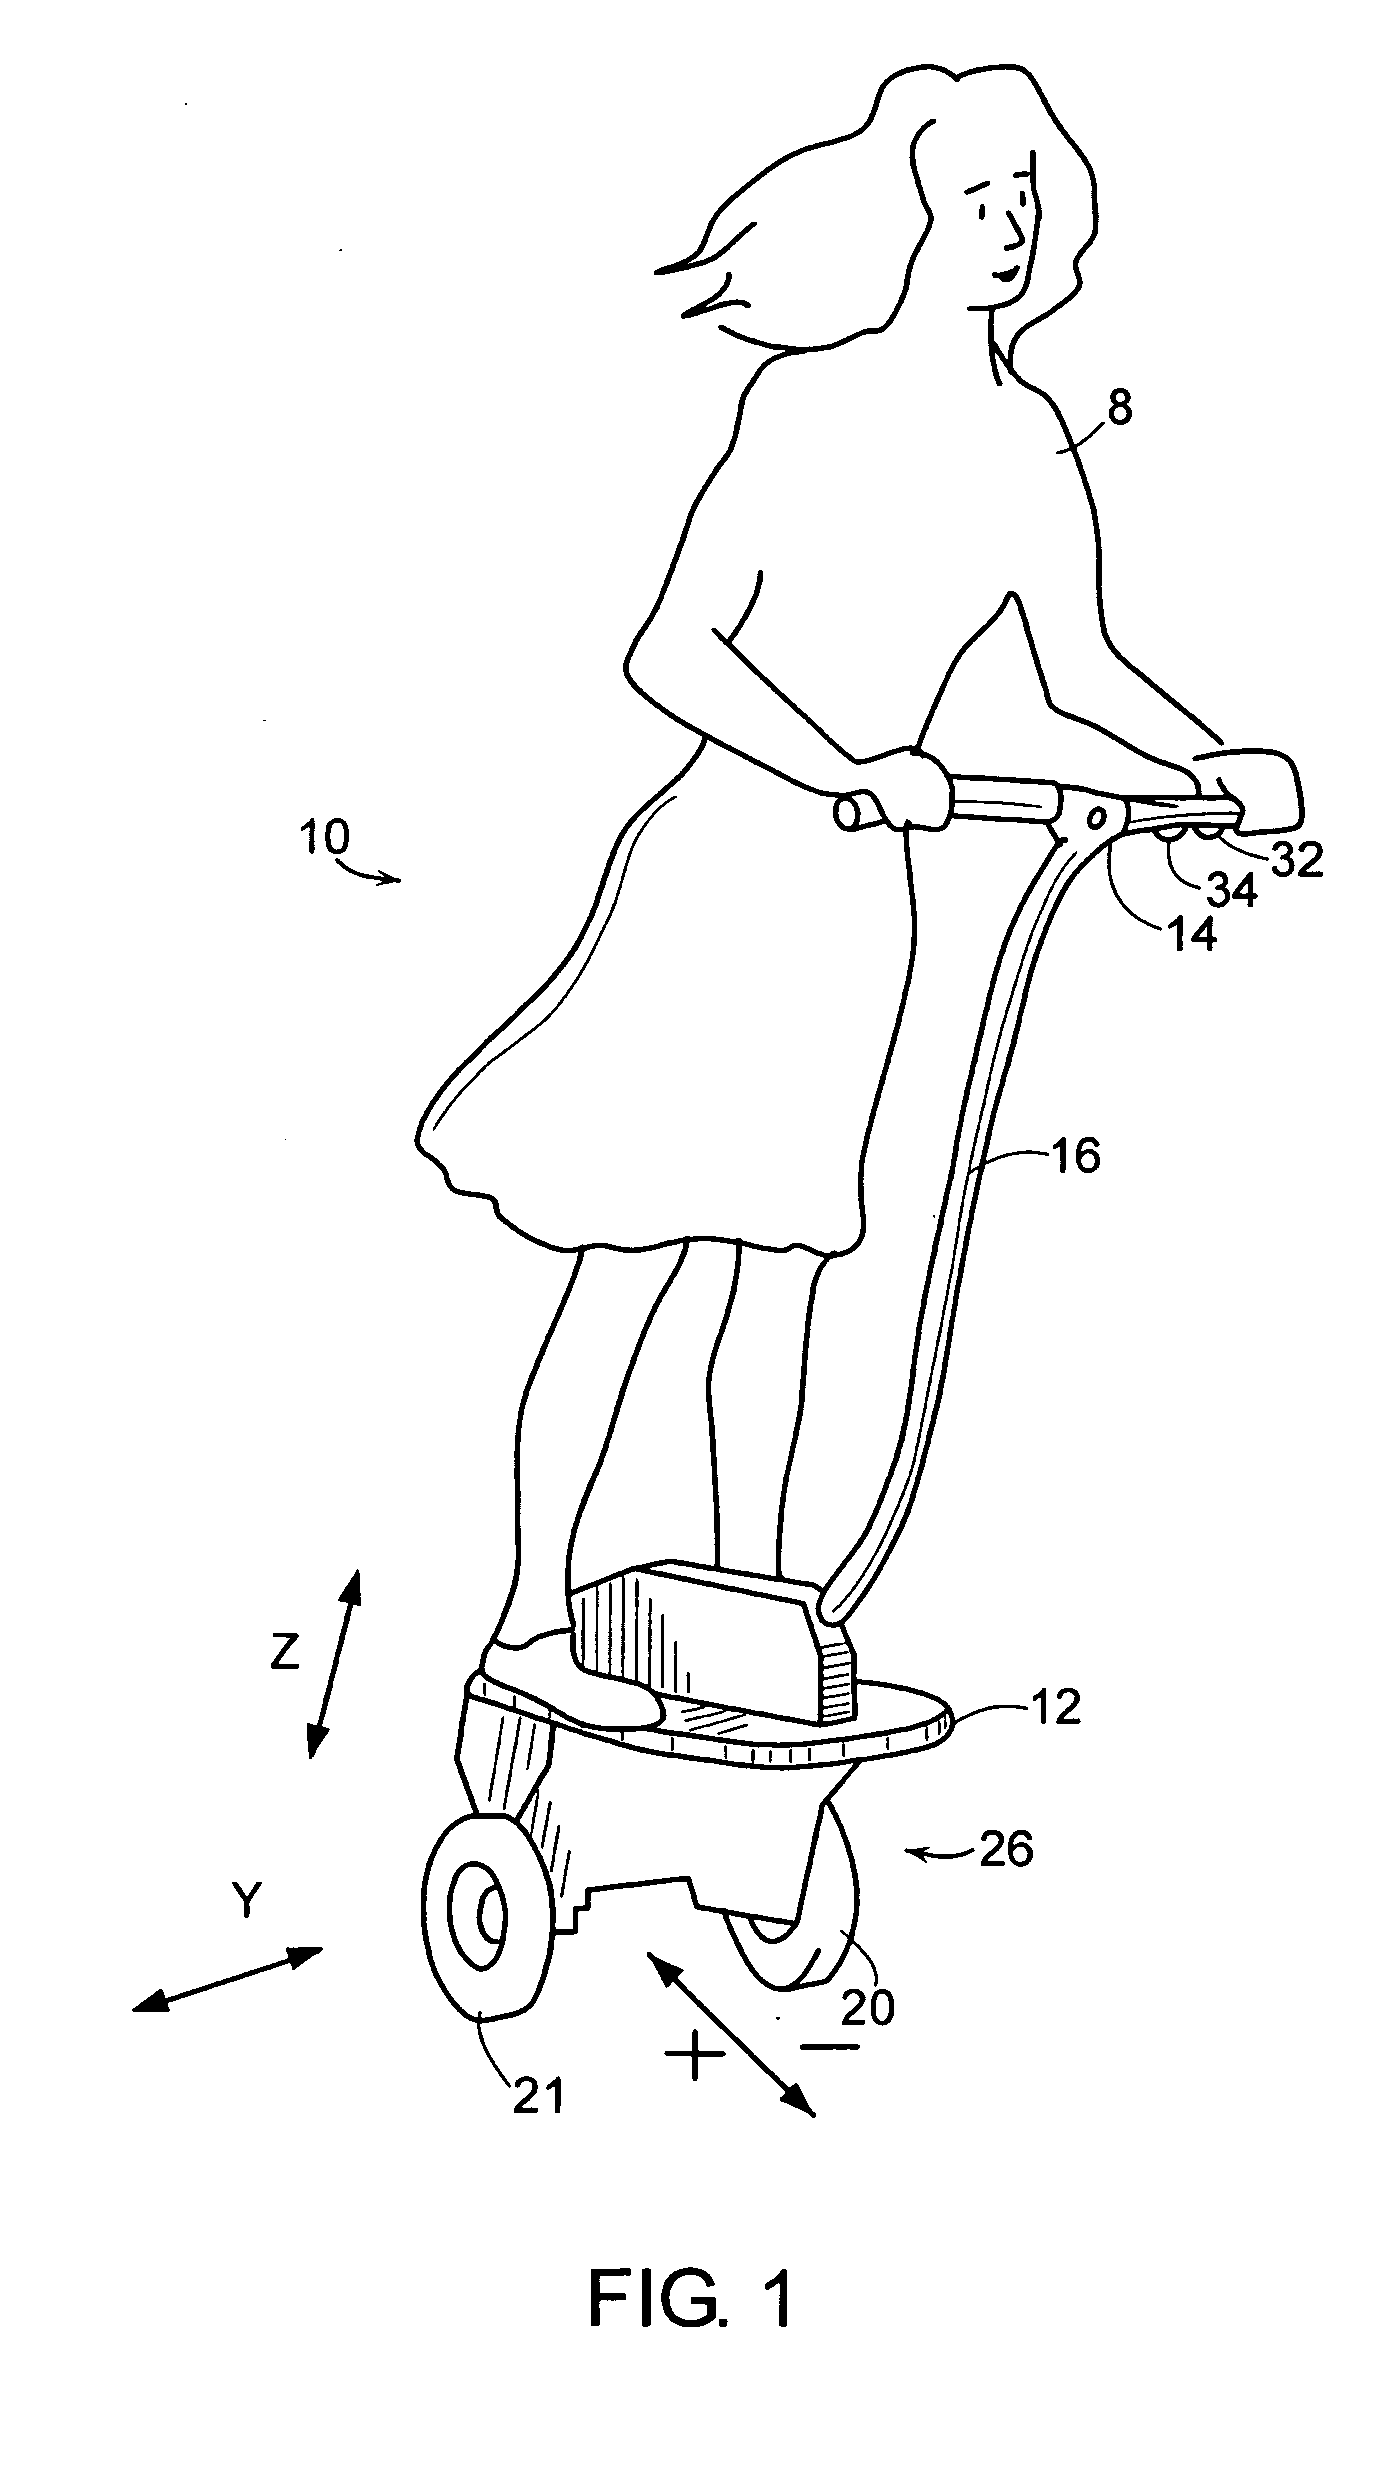 Control of a personal transporter based on user position